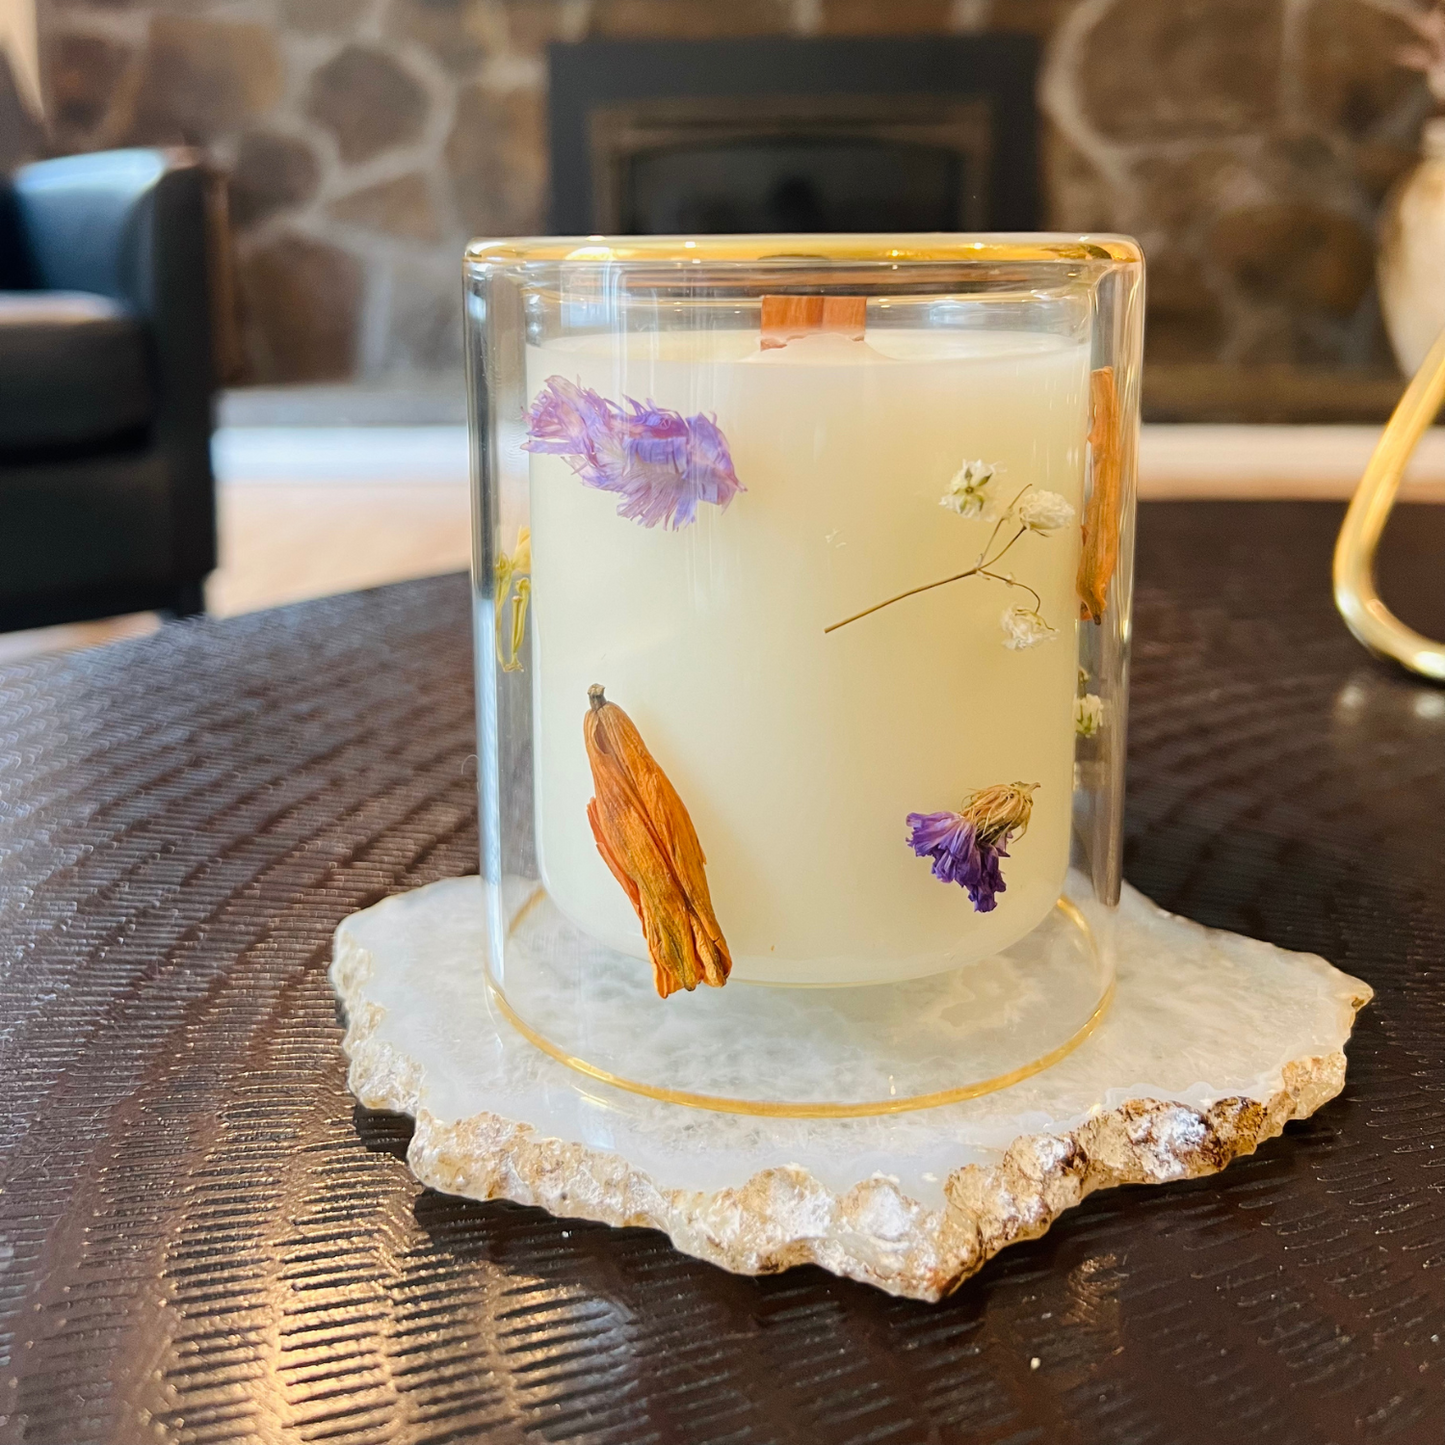 The Bliss of Spring | 14k Gold Rim Candle